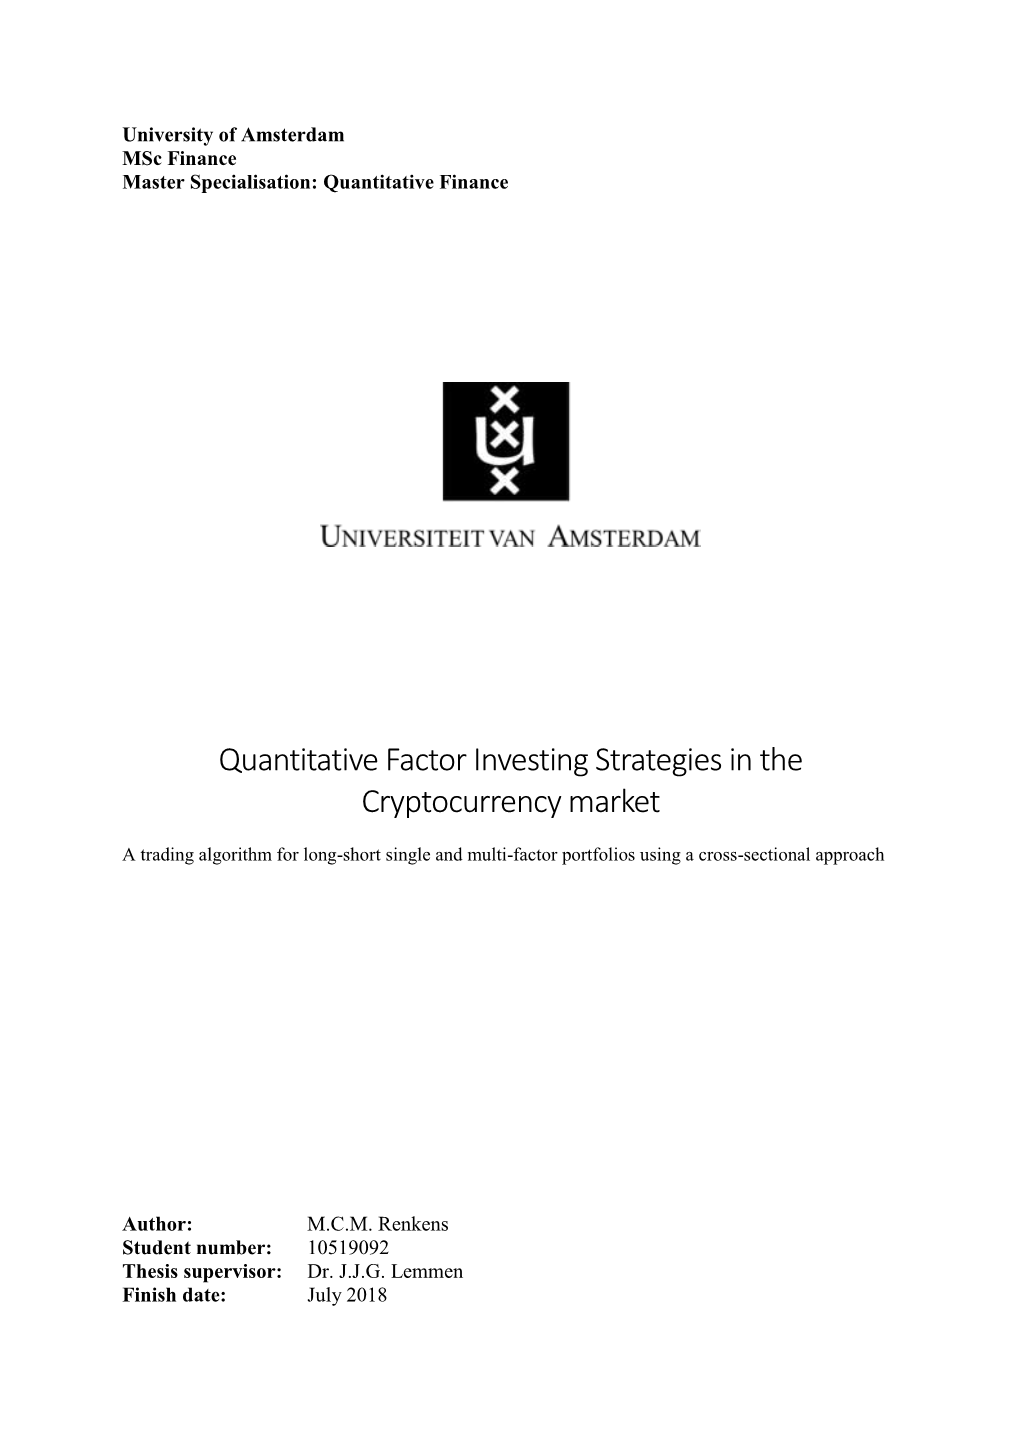 Quantitative Factor Investing Strategies in the Cryptocurrency Market